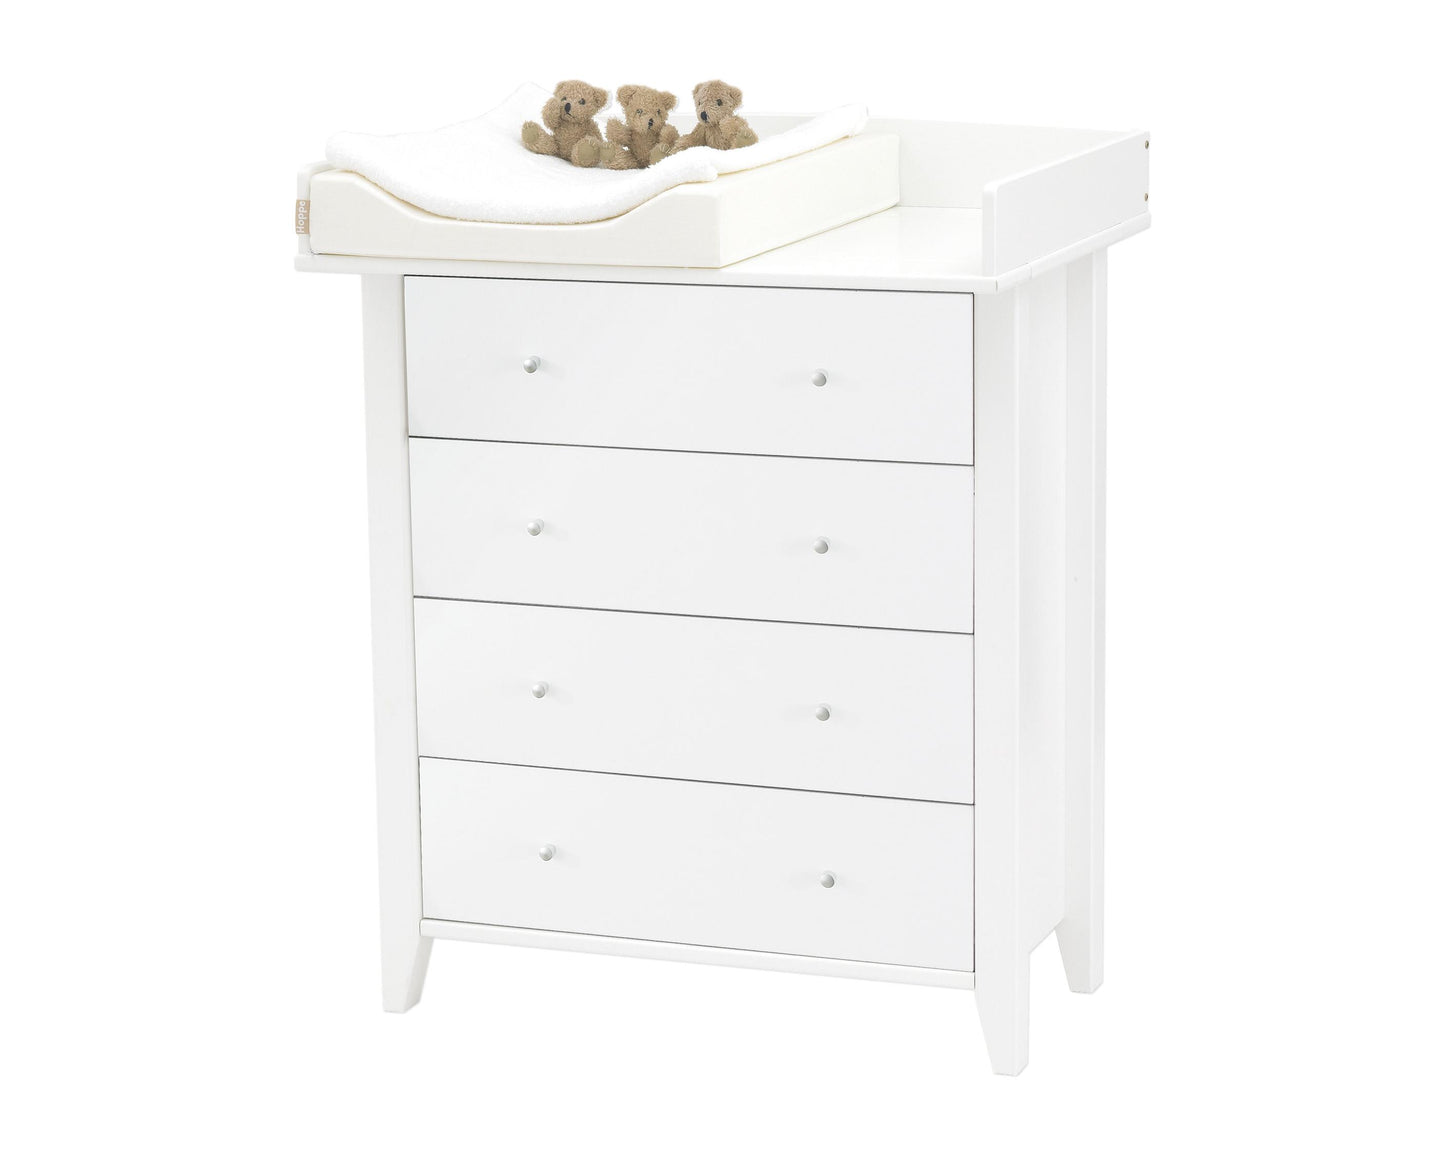 CHRISTIAN - Chest with drawers - white